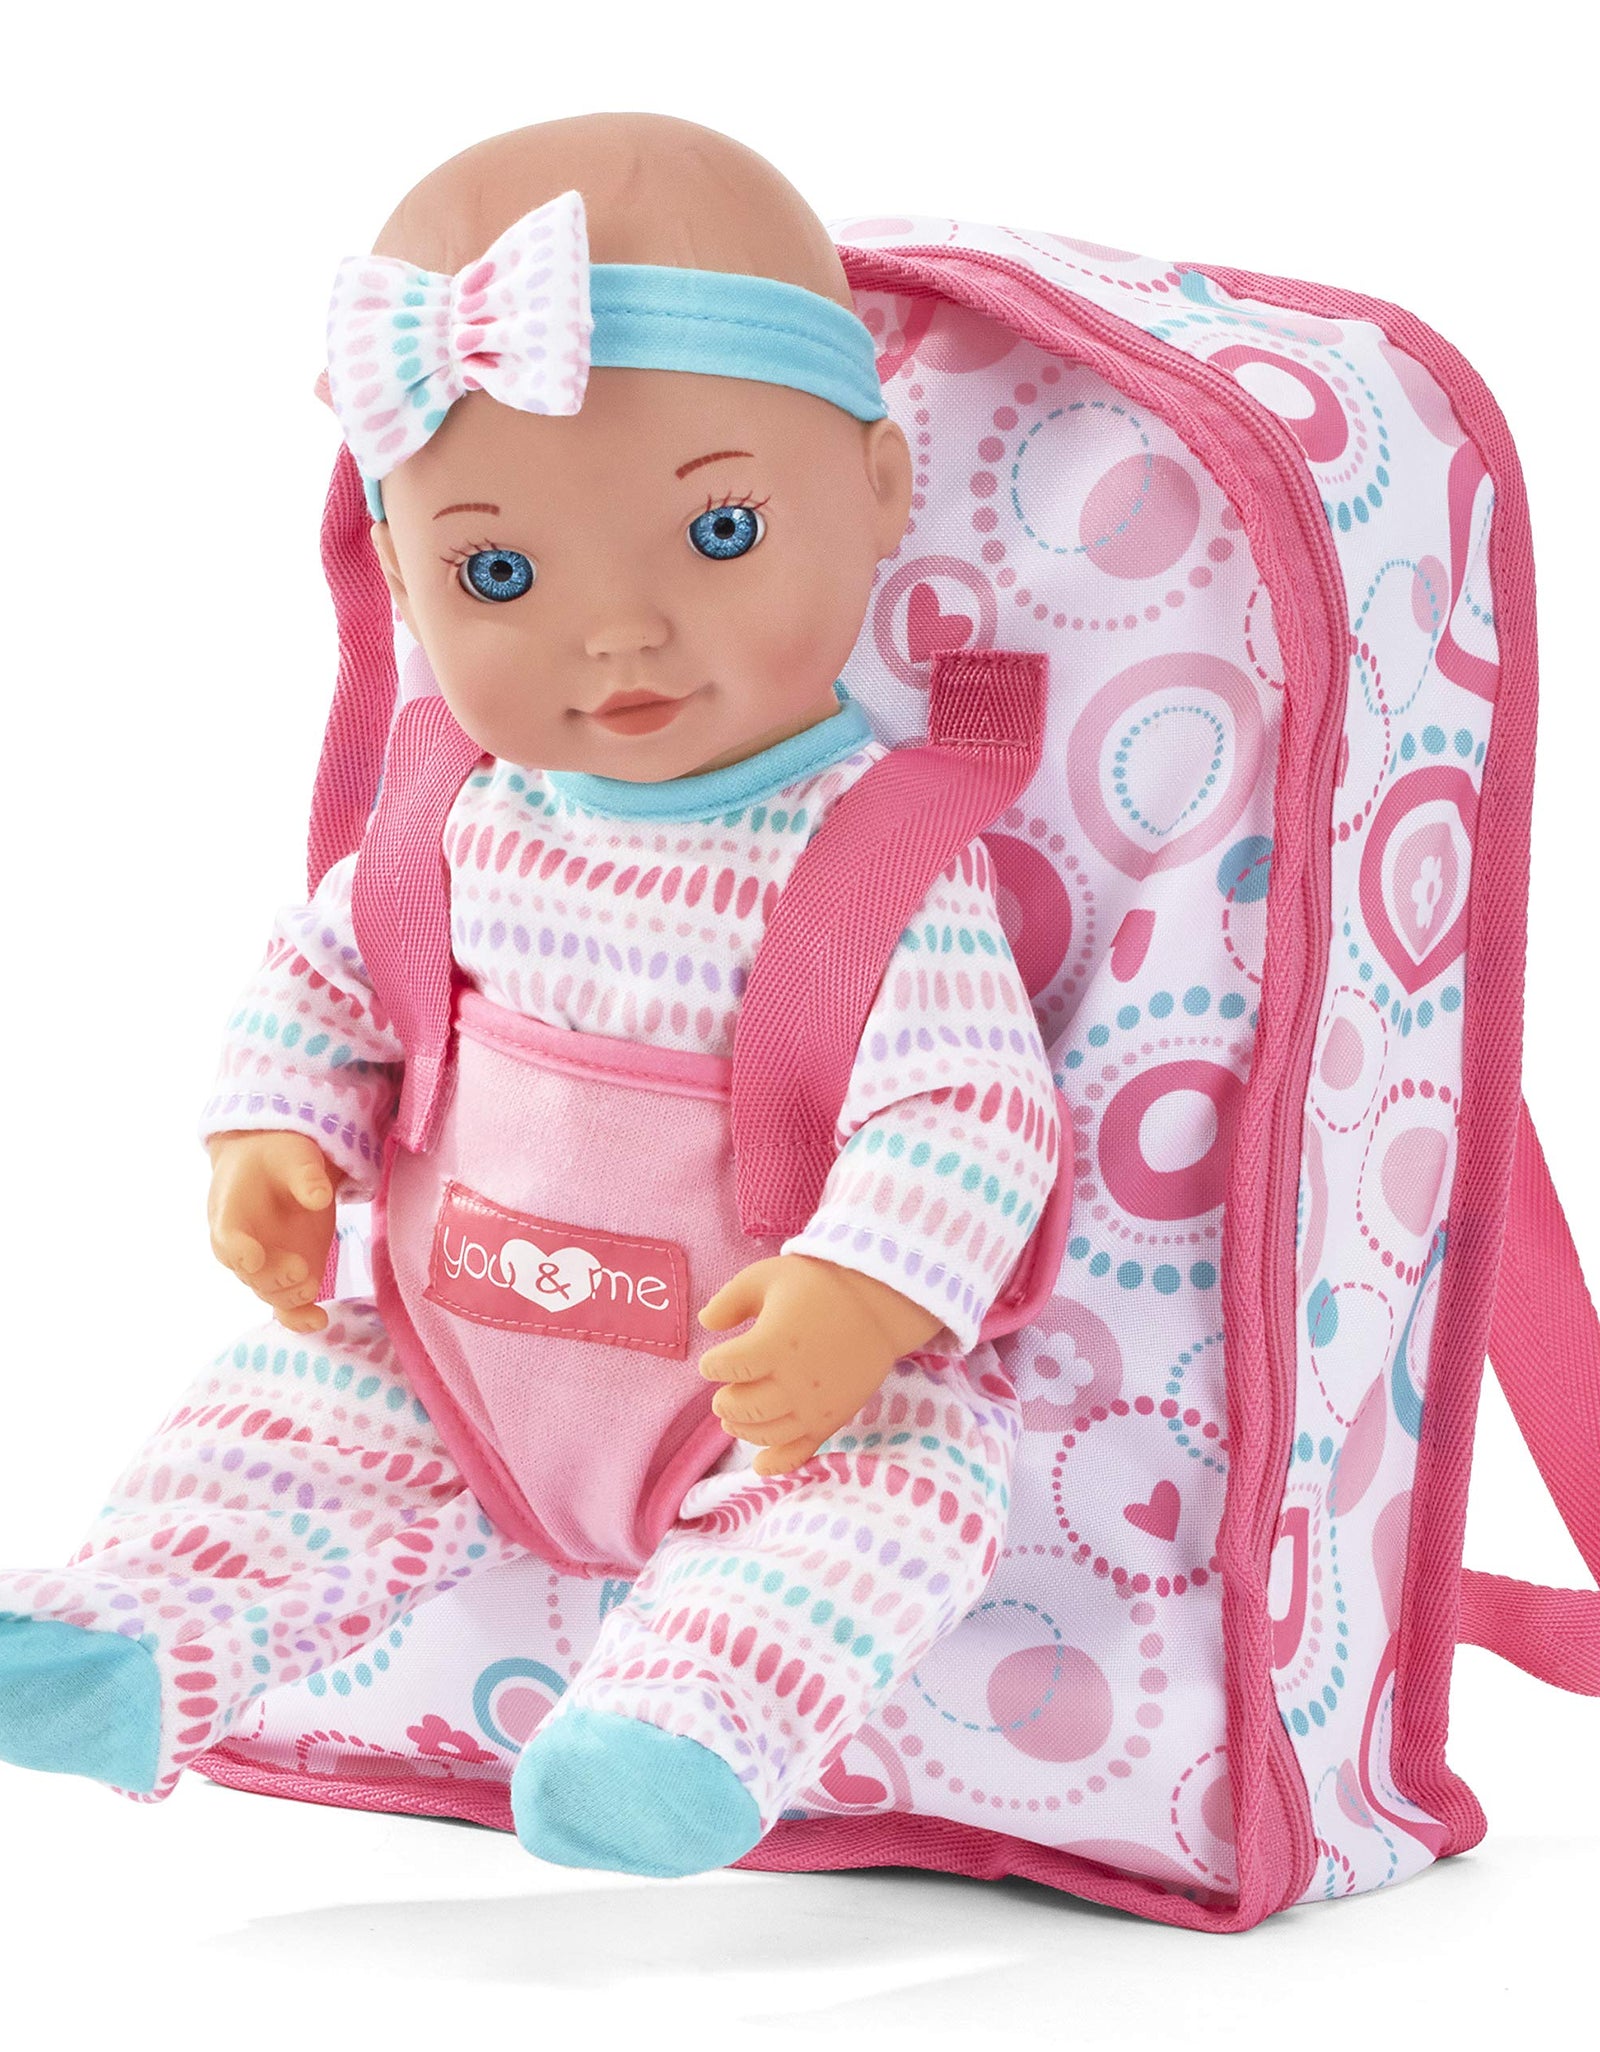 You & Me Travel Baby Doll with Backpack